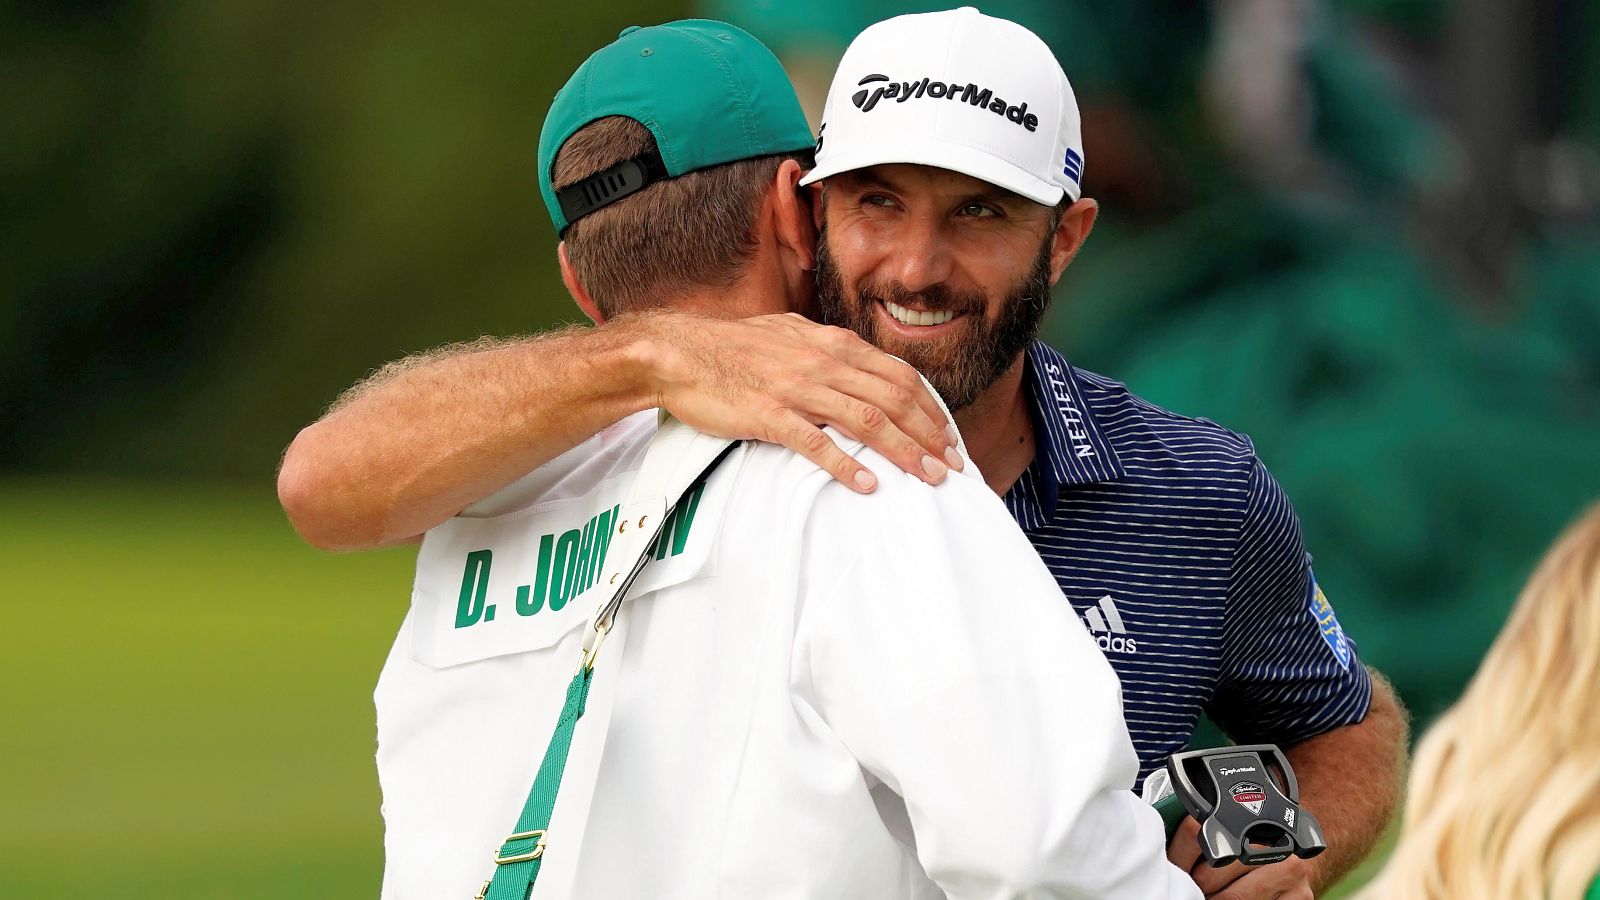 2020 Masters Champion: Dustin Johnson / USA © Augusta National / Getty Images